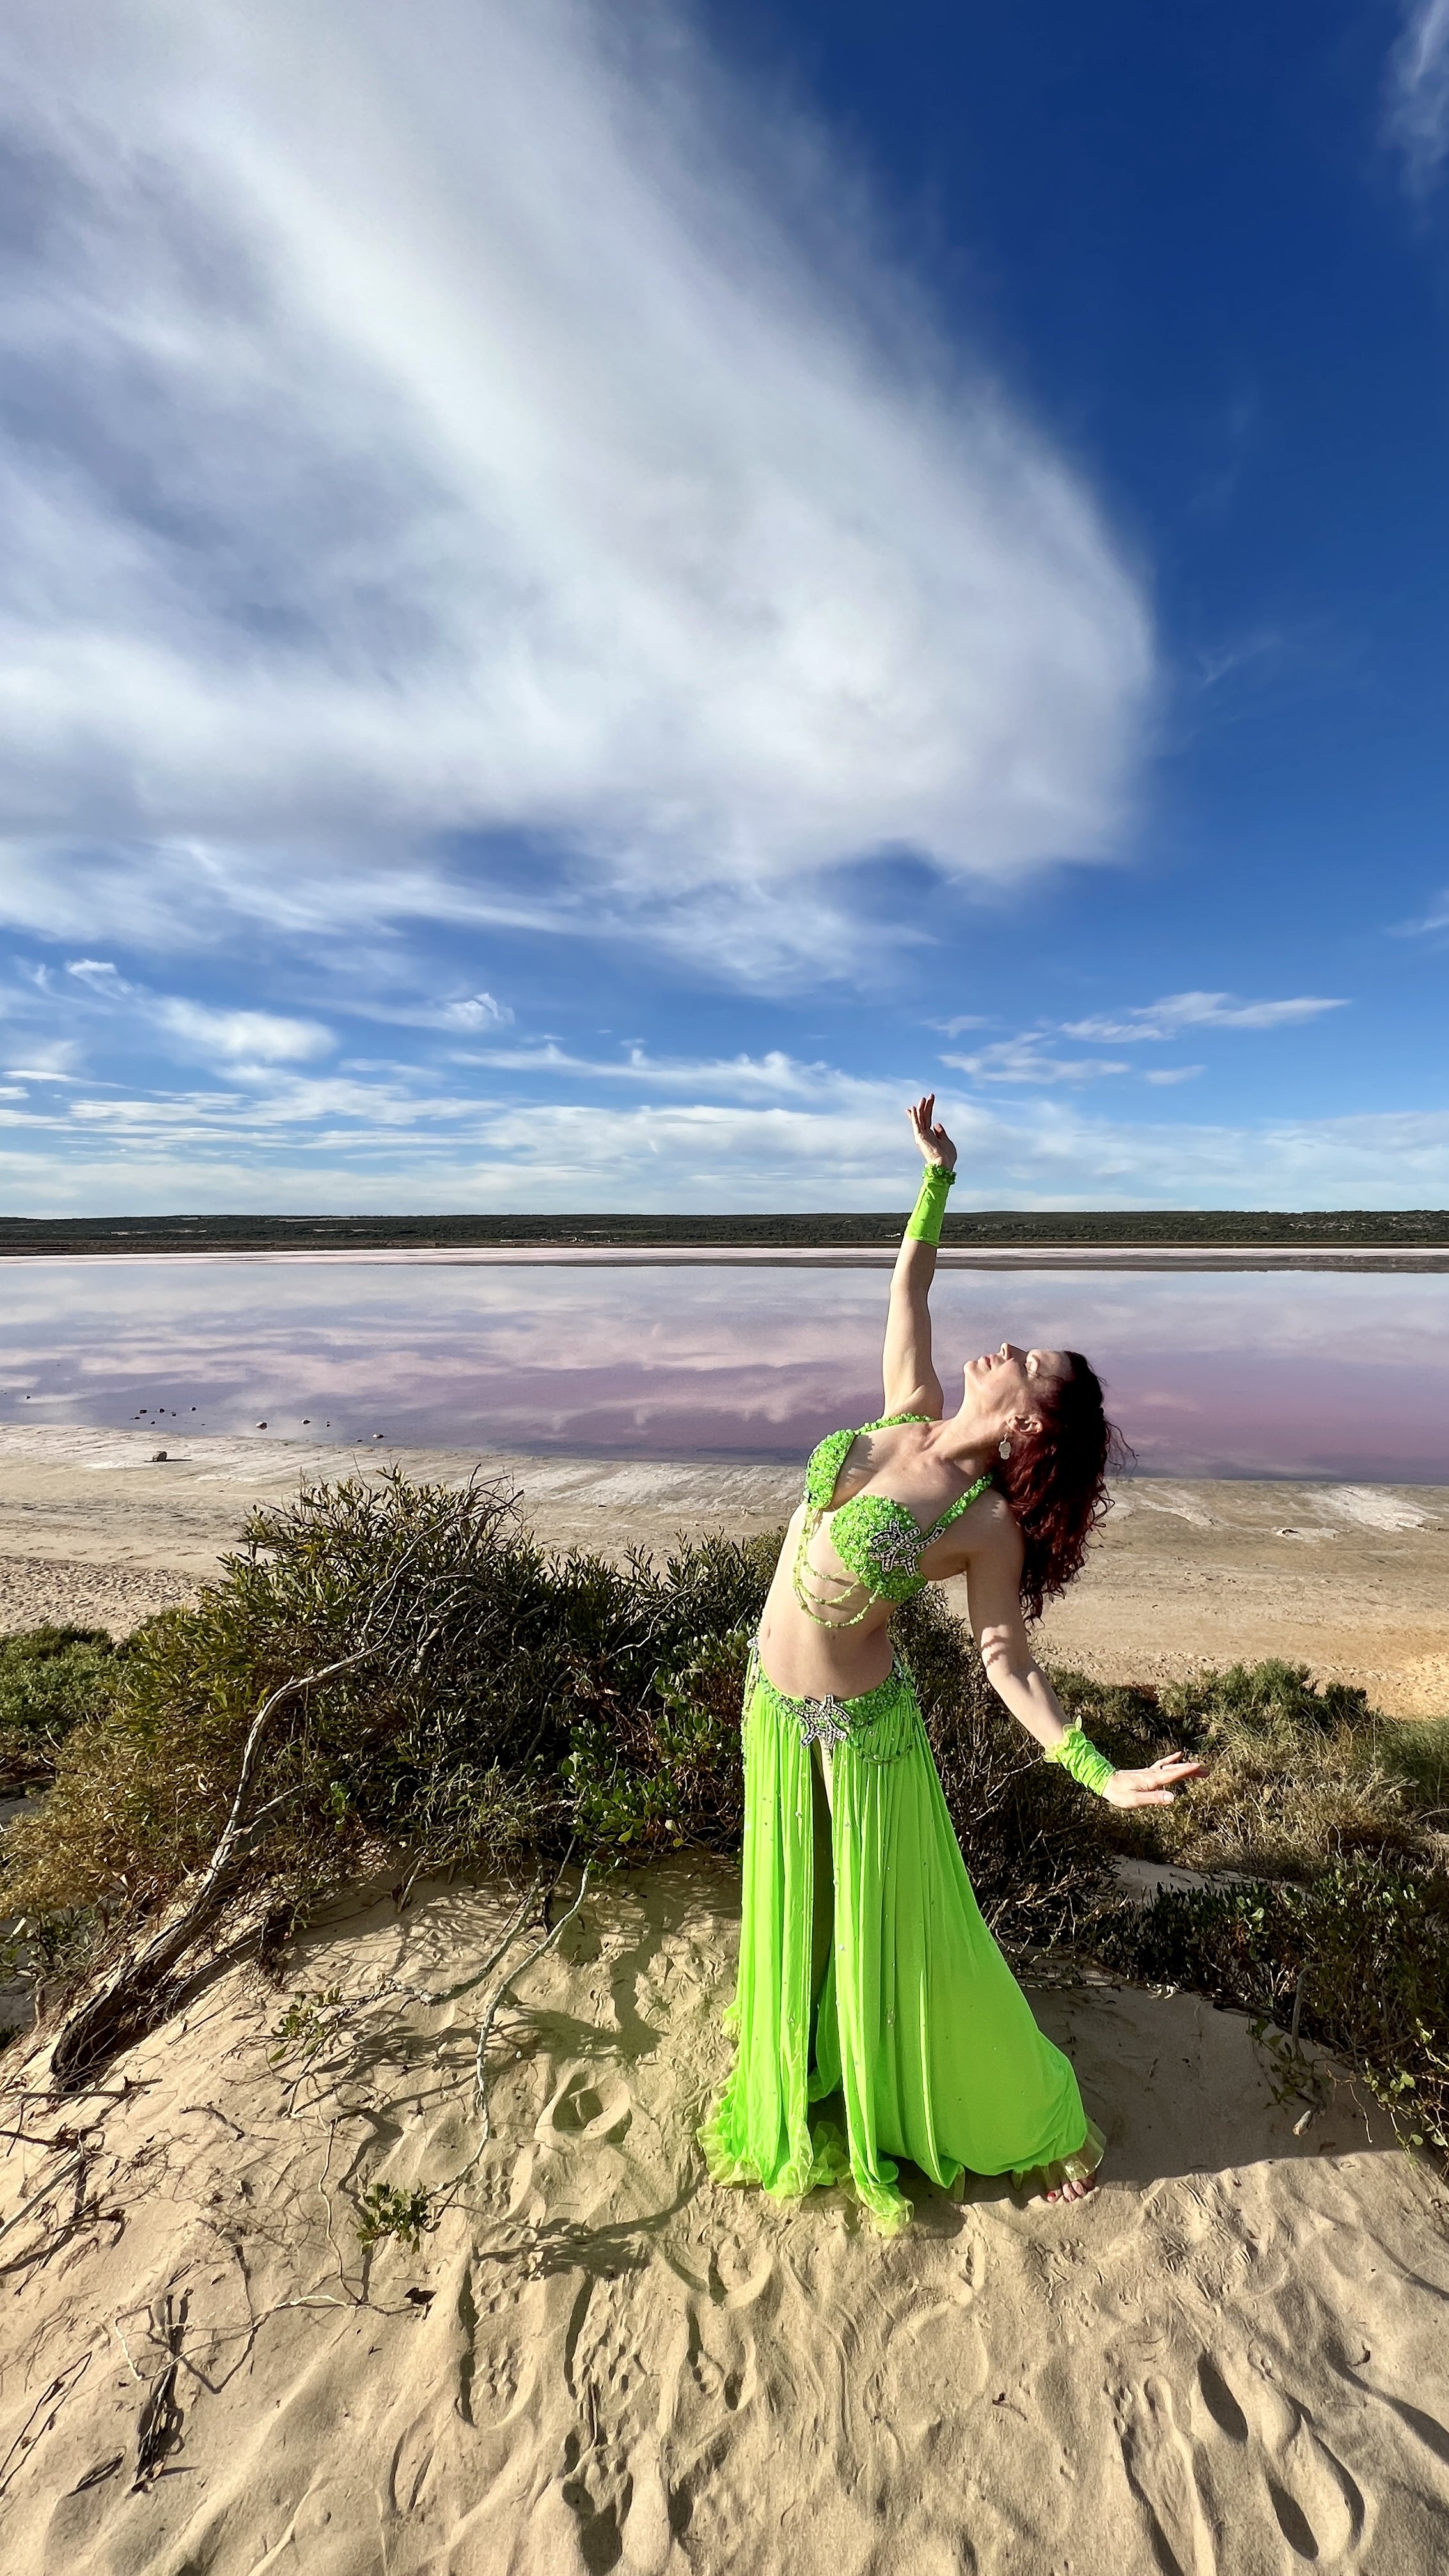 Hutt Lagoon is about 6 hours north of Perth